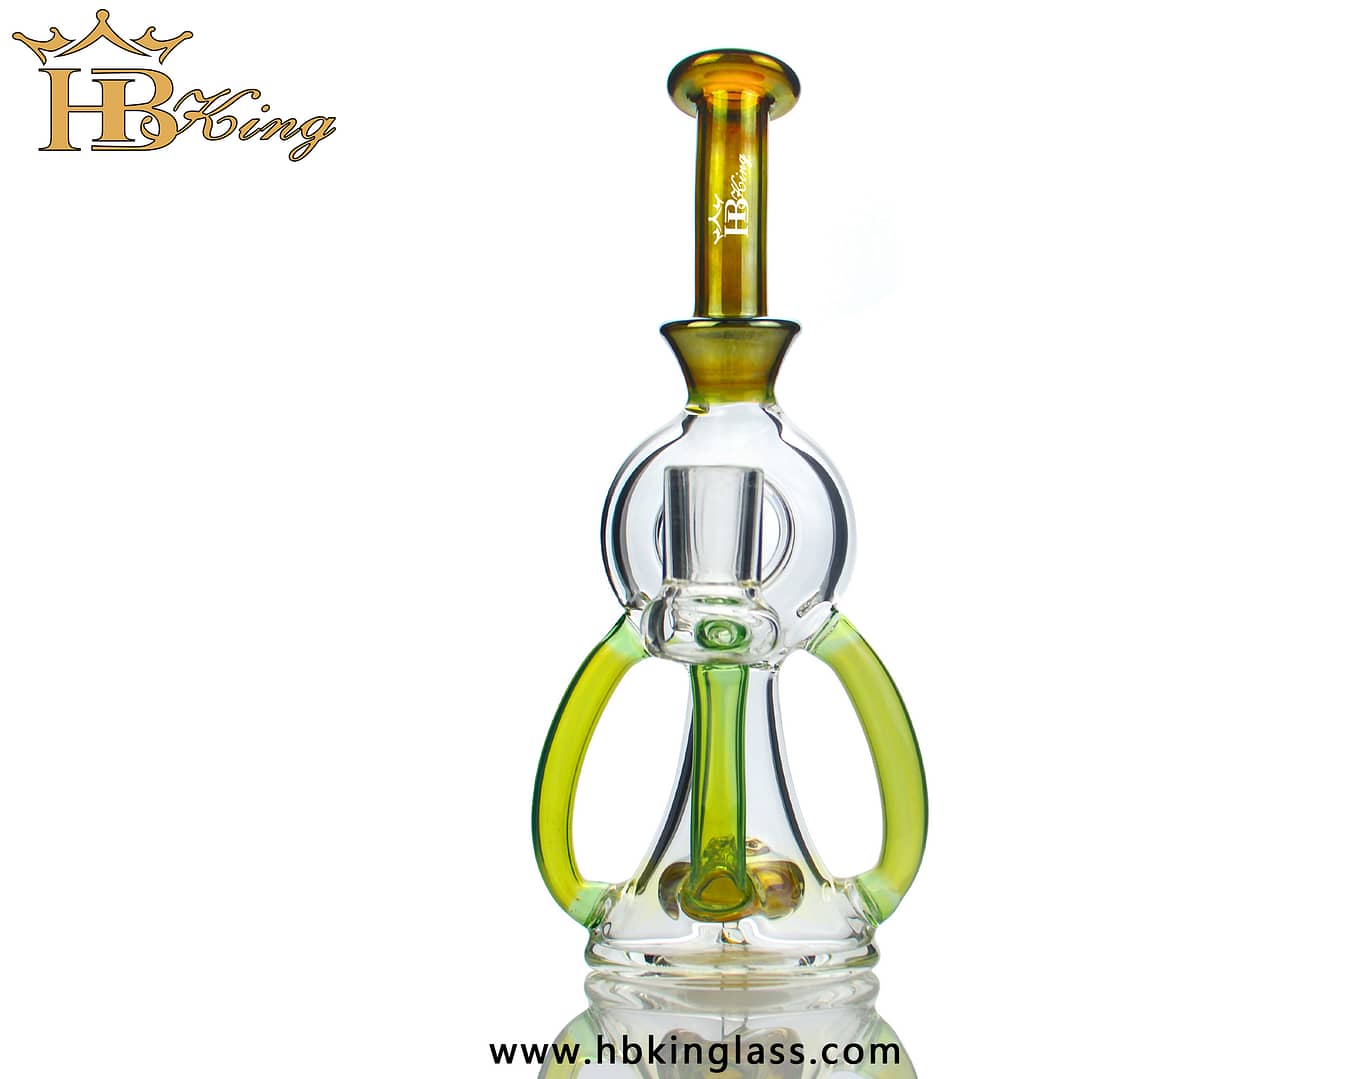 KR360 8-inch Electroplate Color Recycler Bong